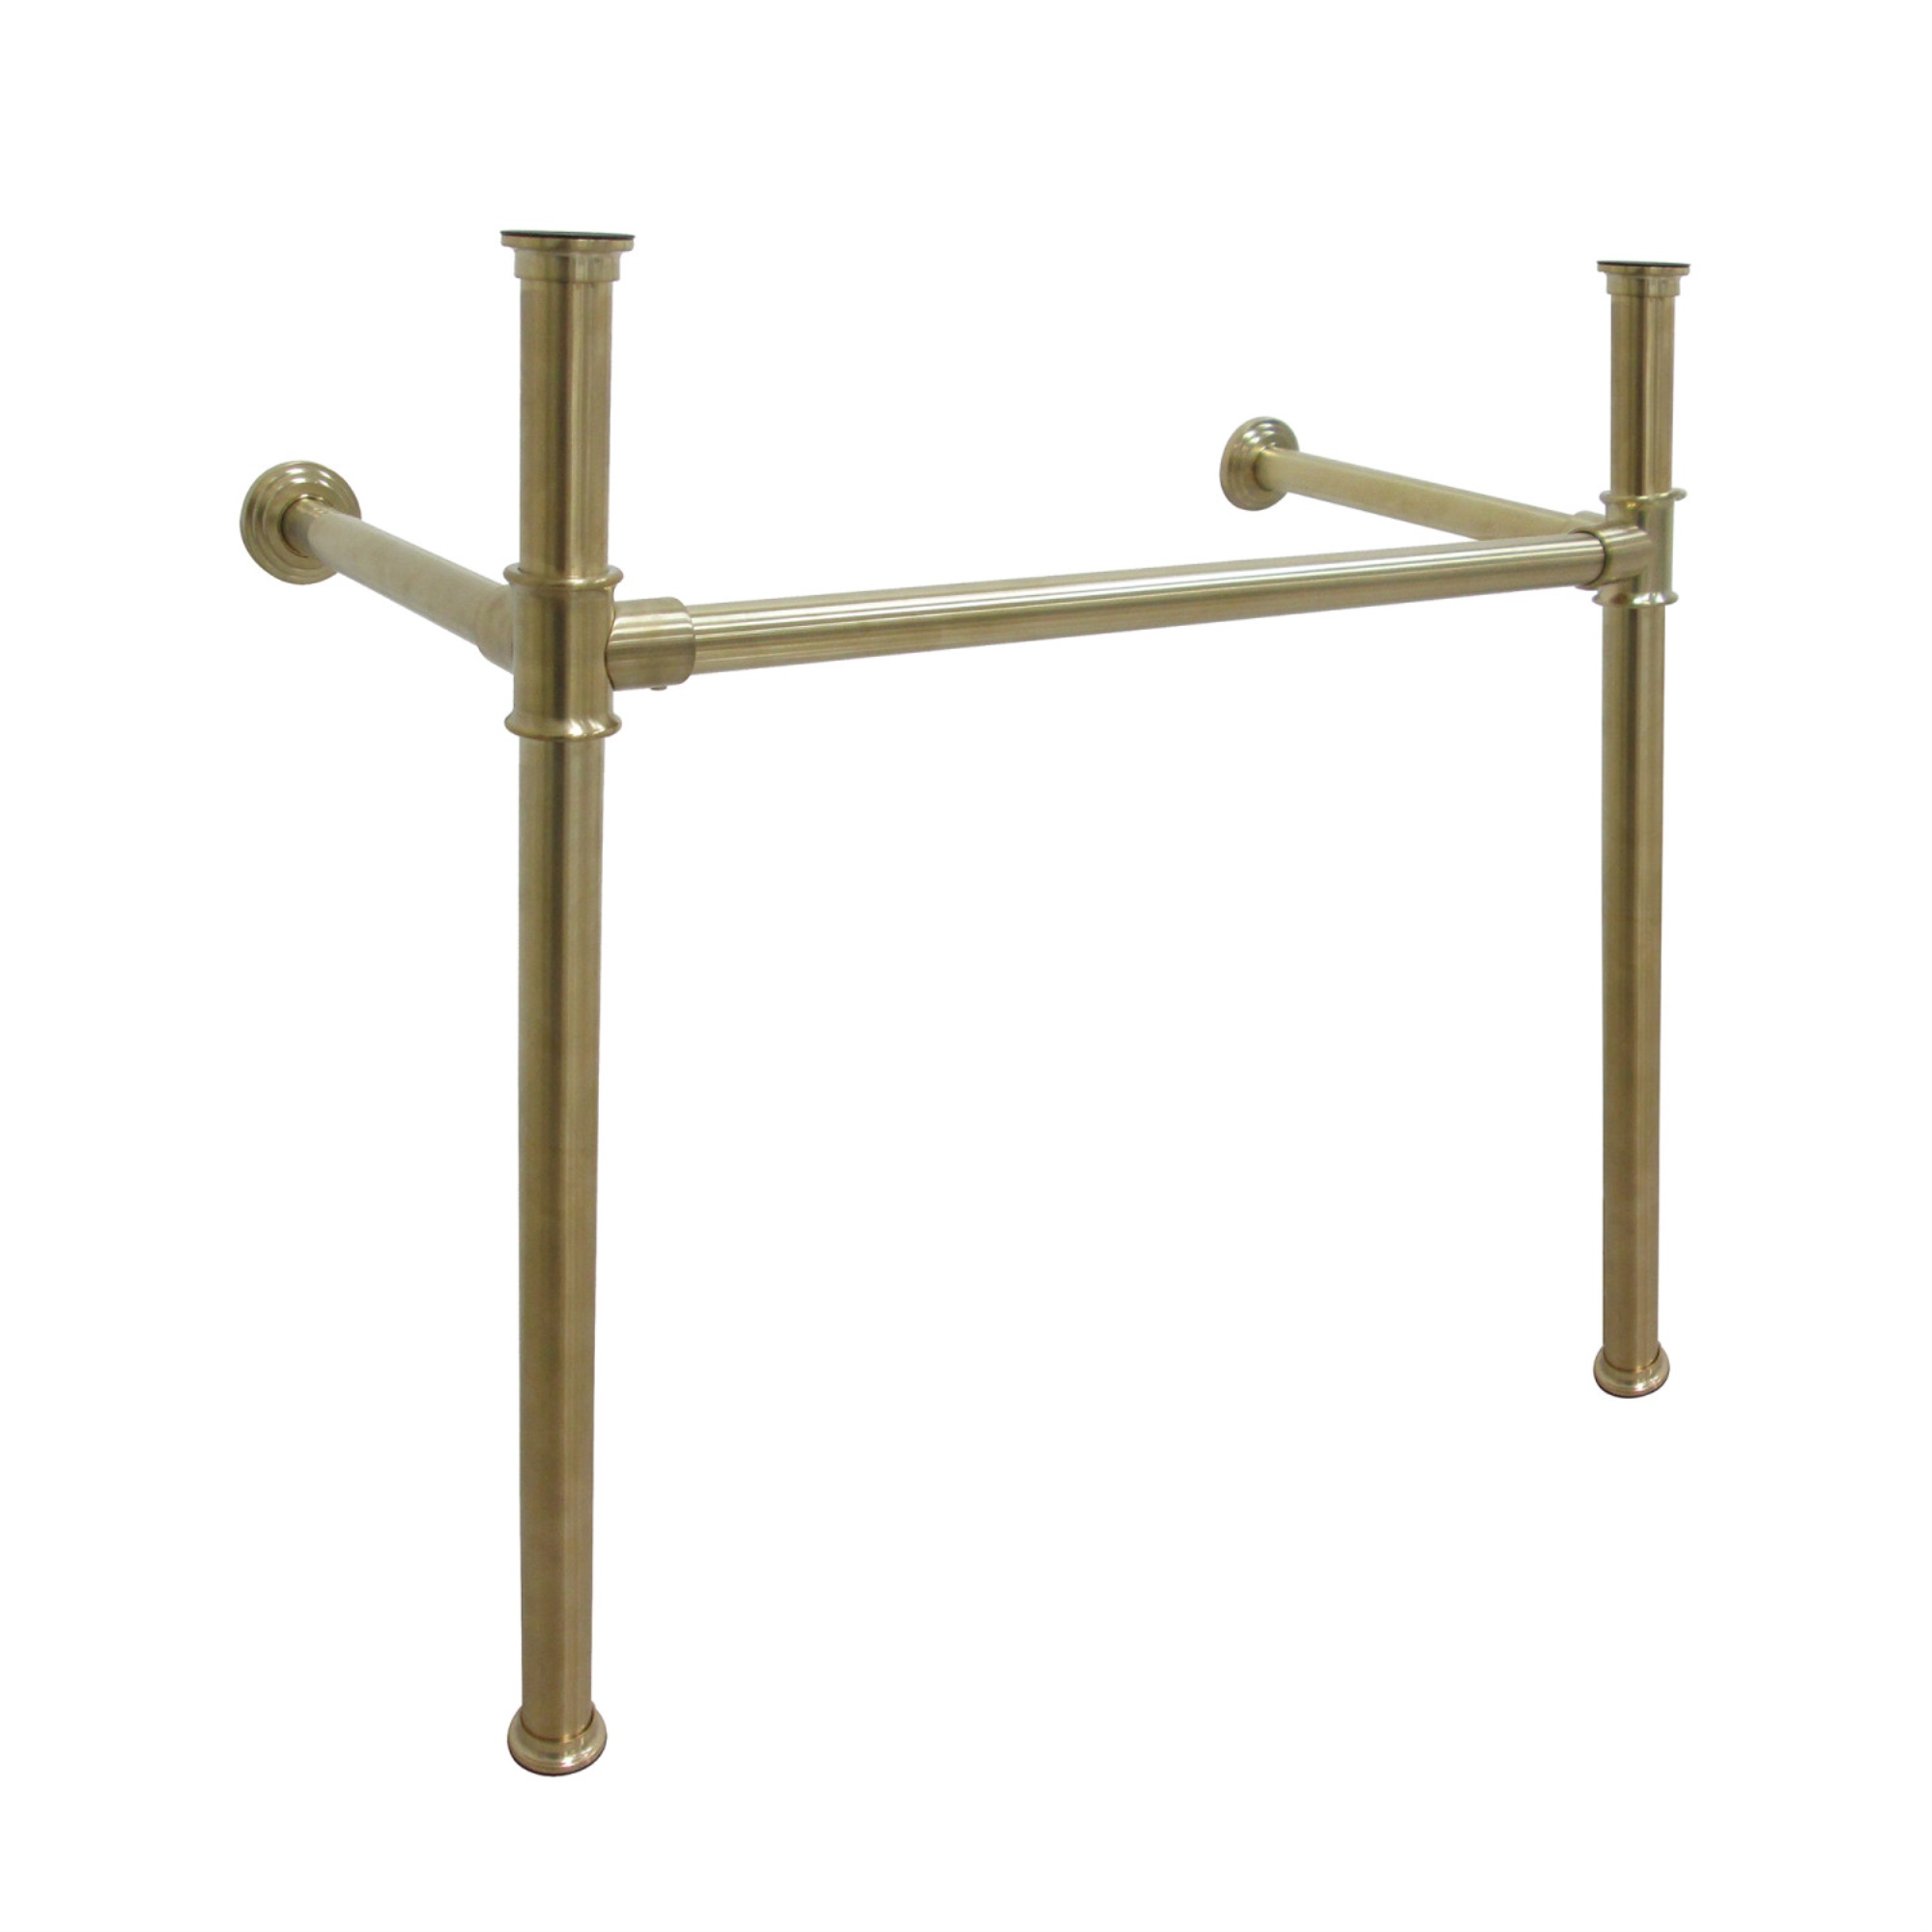 Fauceture Kingston Brass VPB13687 Fauceture Stainless Steel Console Sink Legs, Brushed Brass